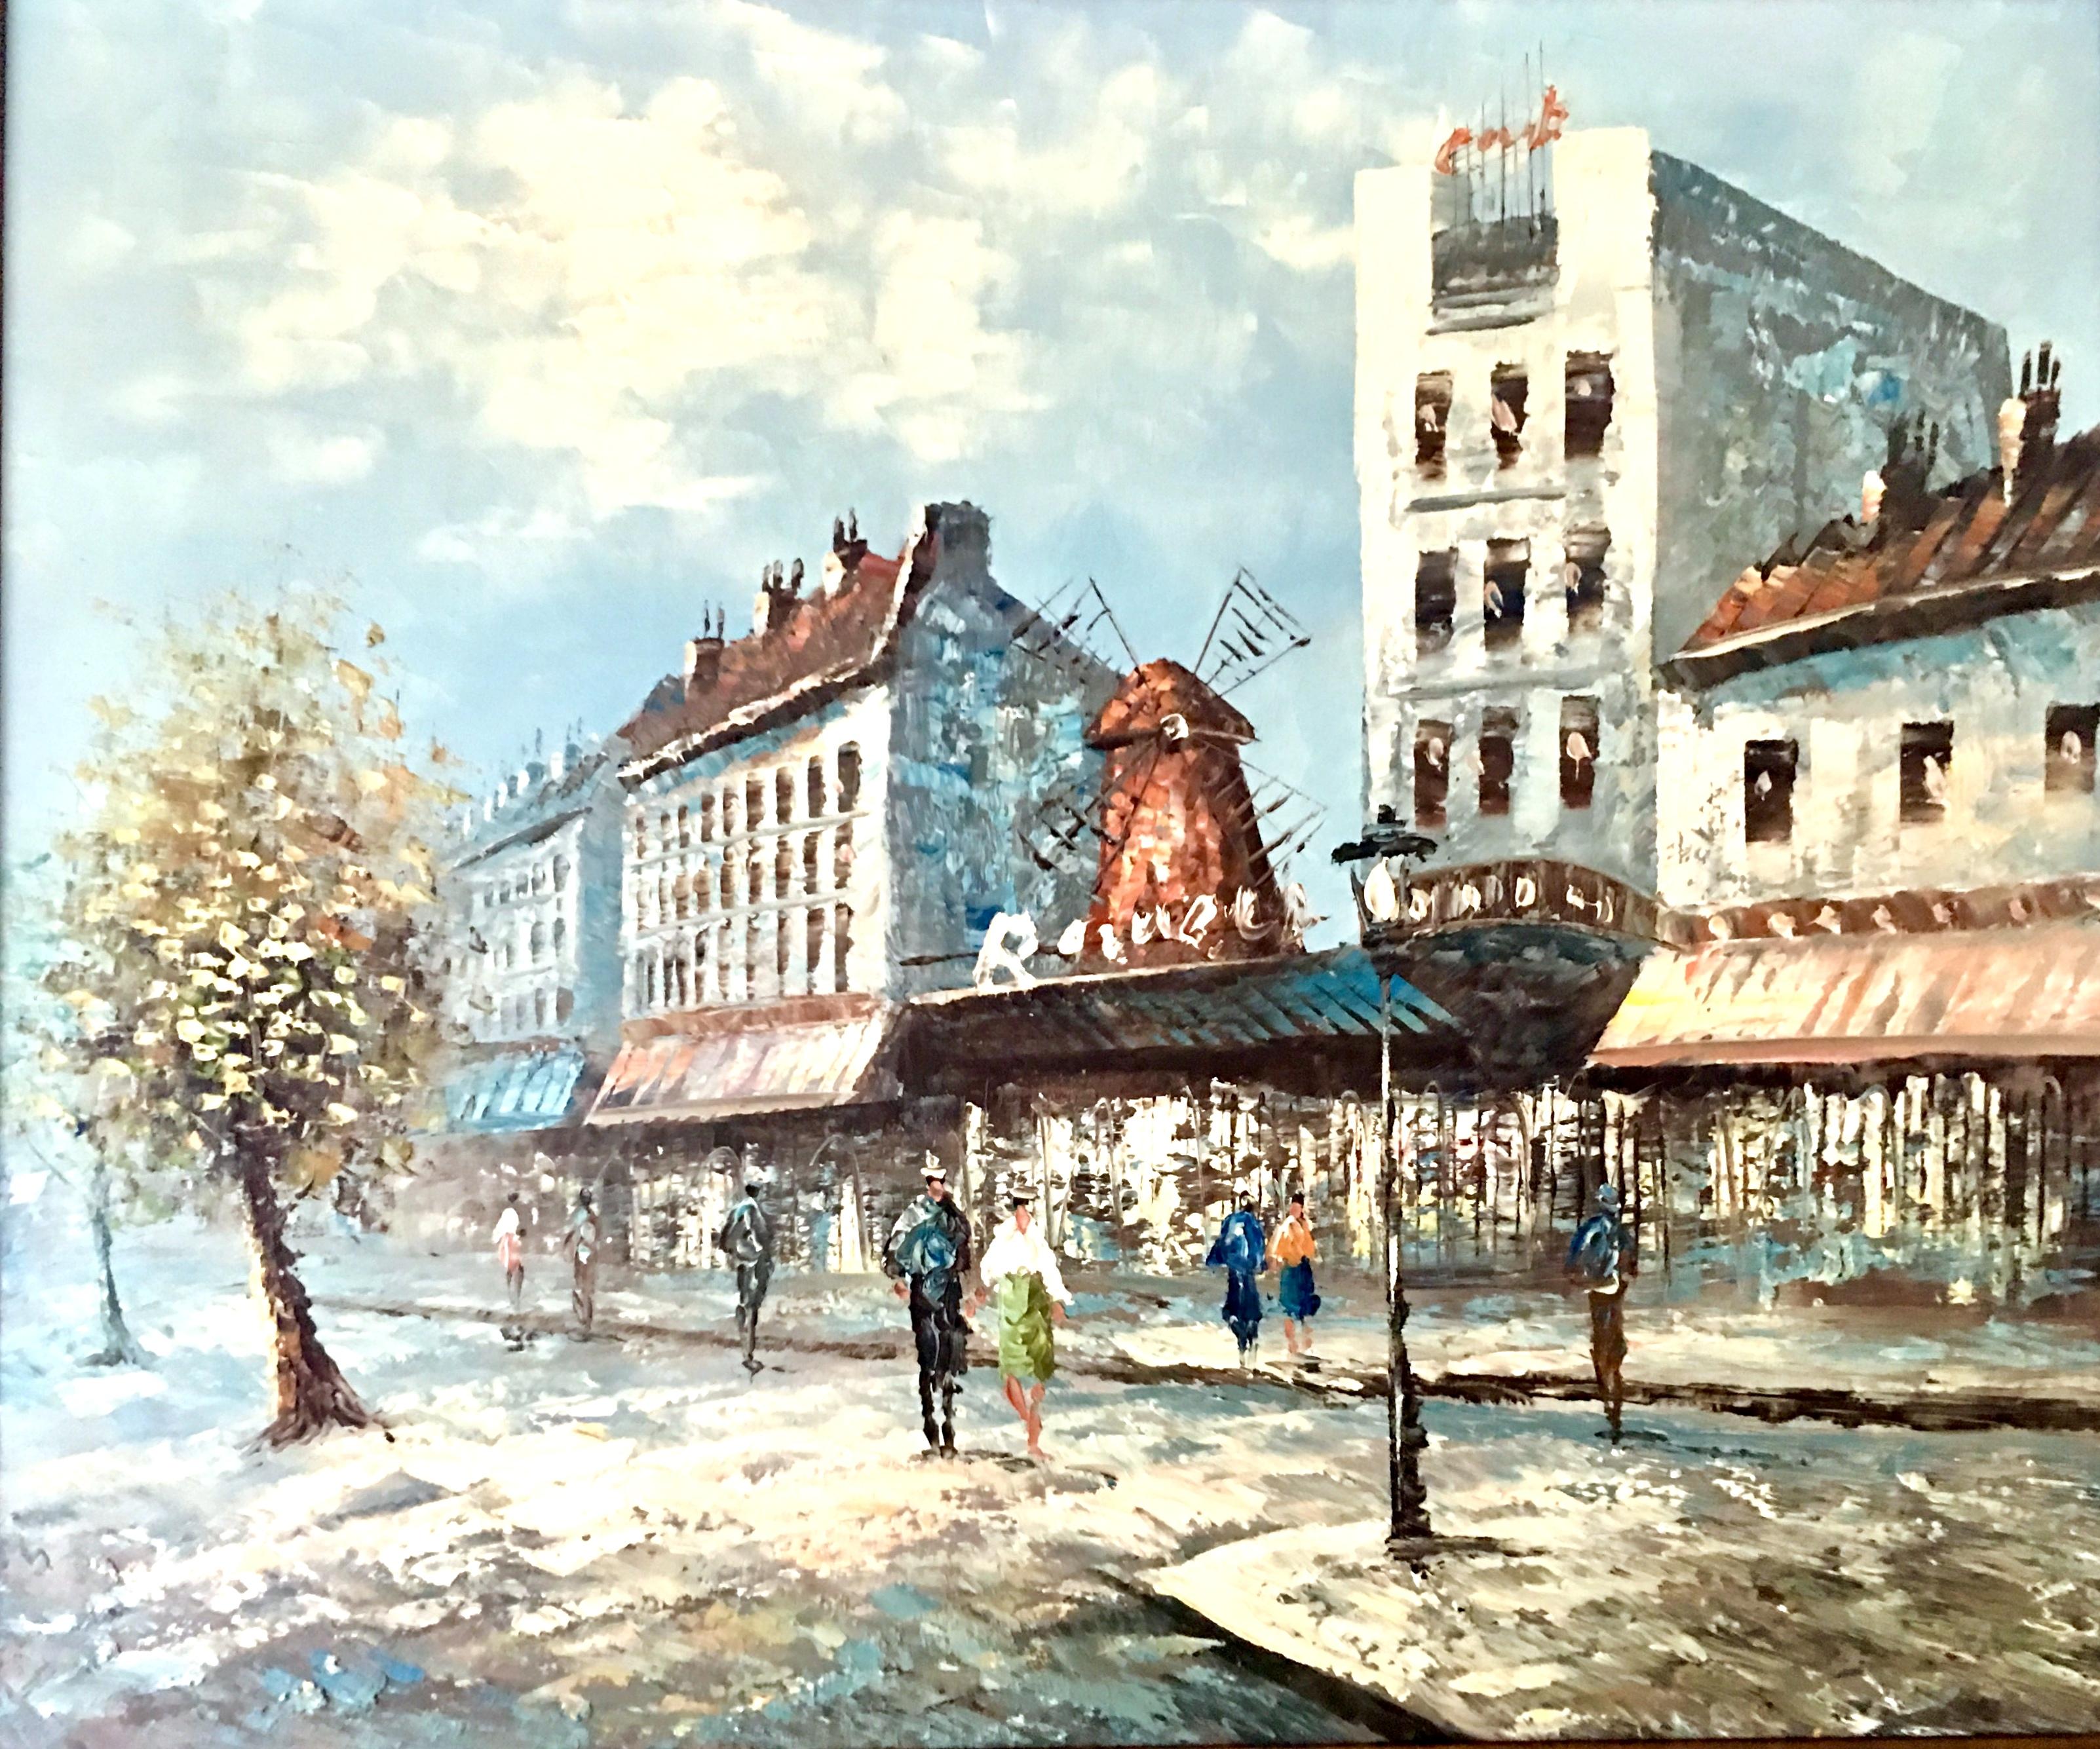 20th century original oil on canvas painting, Paris Street Scene -Moulon Rouge by, Burnett. This original piece of impressionist, impasto art is quintessential Burnett style, executed with great detail and dimensional texture. Pencil signed/printed